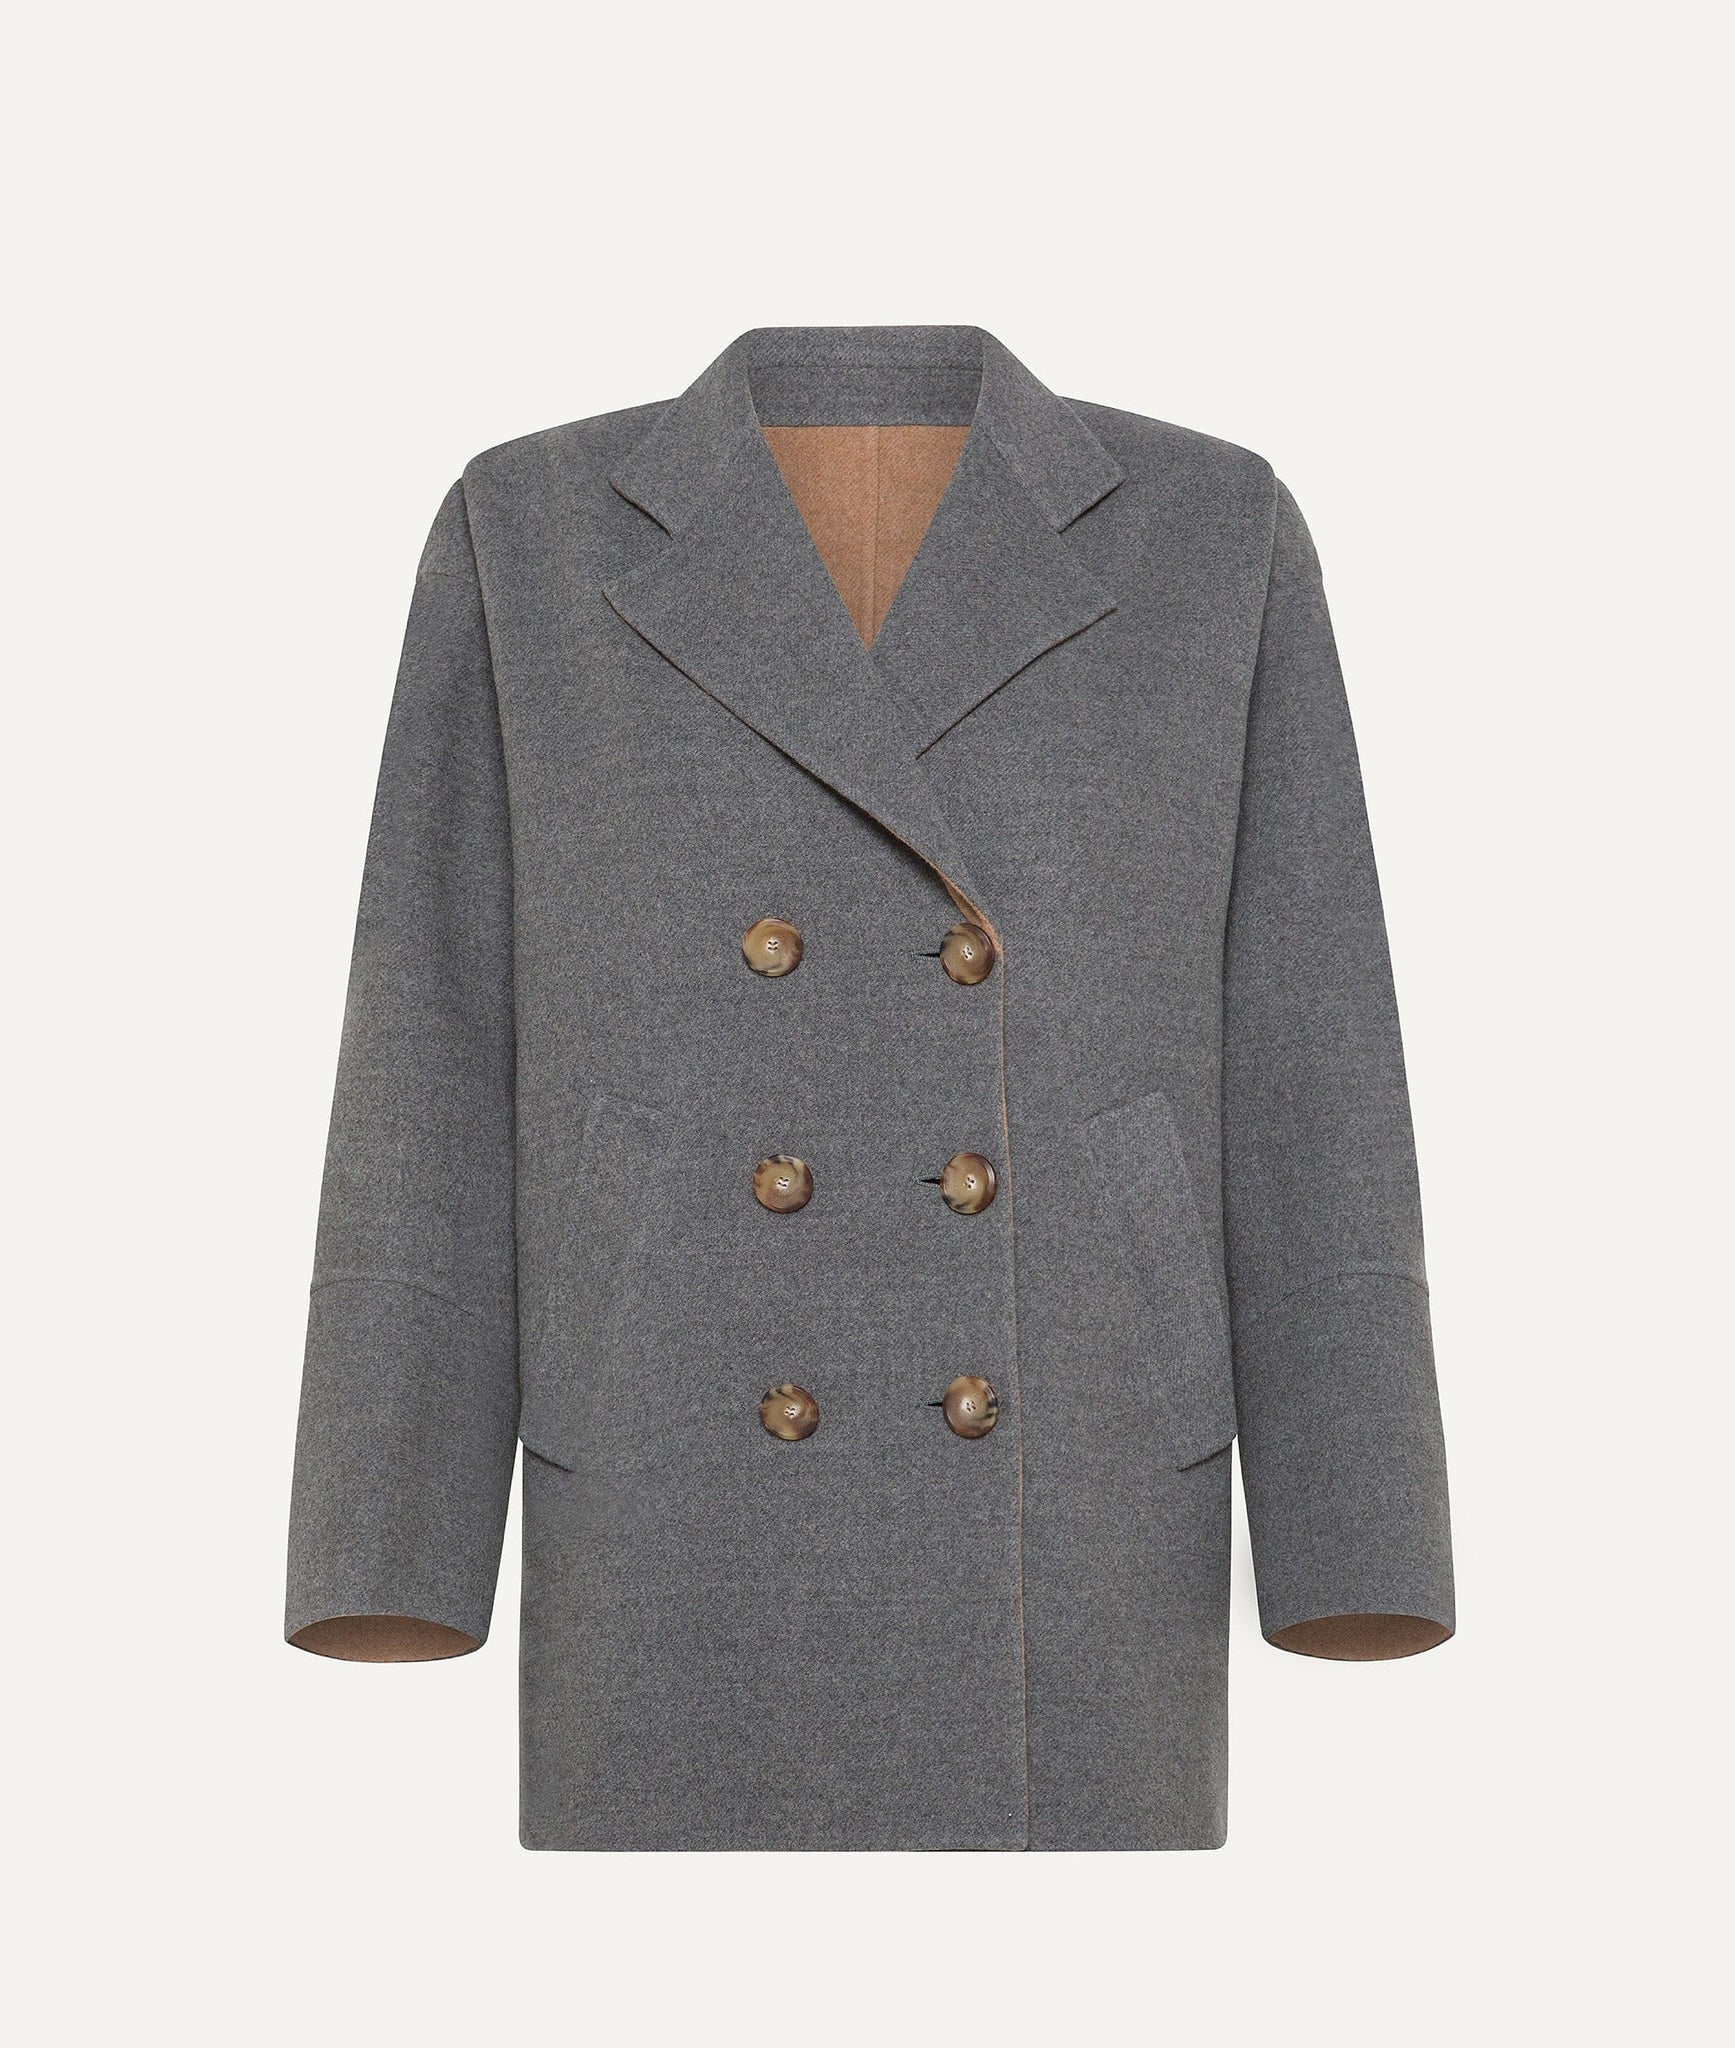 Eleventy - Reversible Doble Breasted Coat in Wool